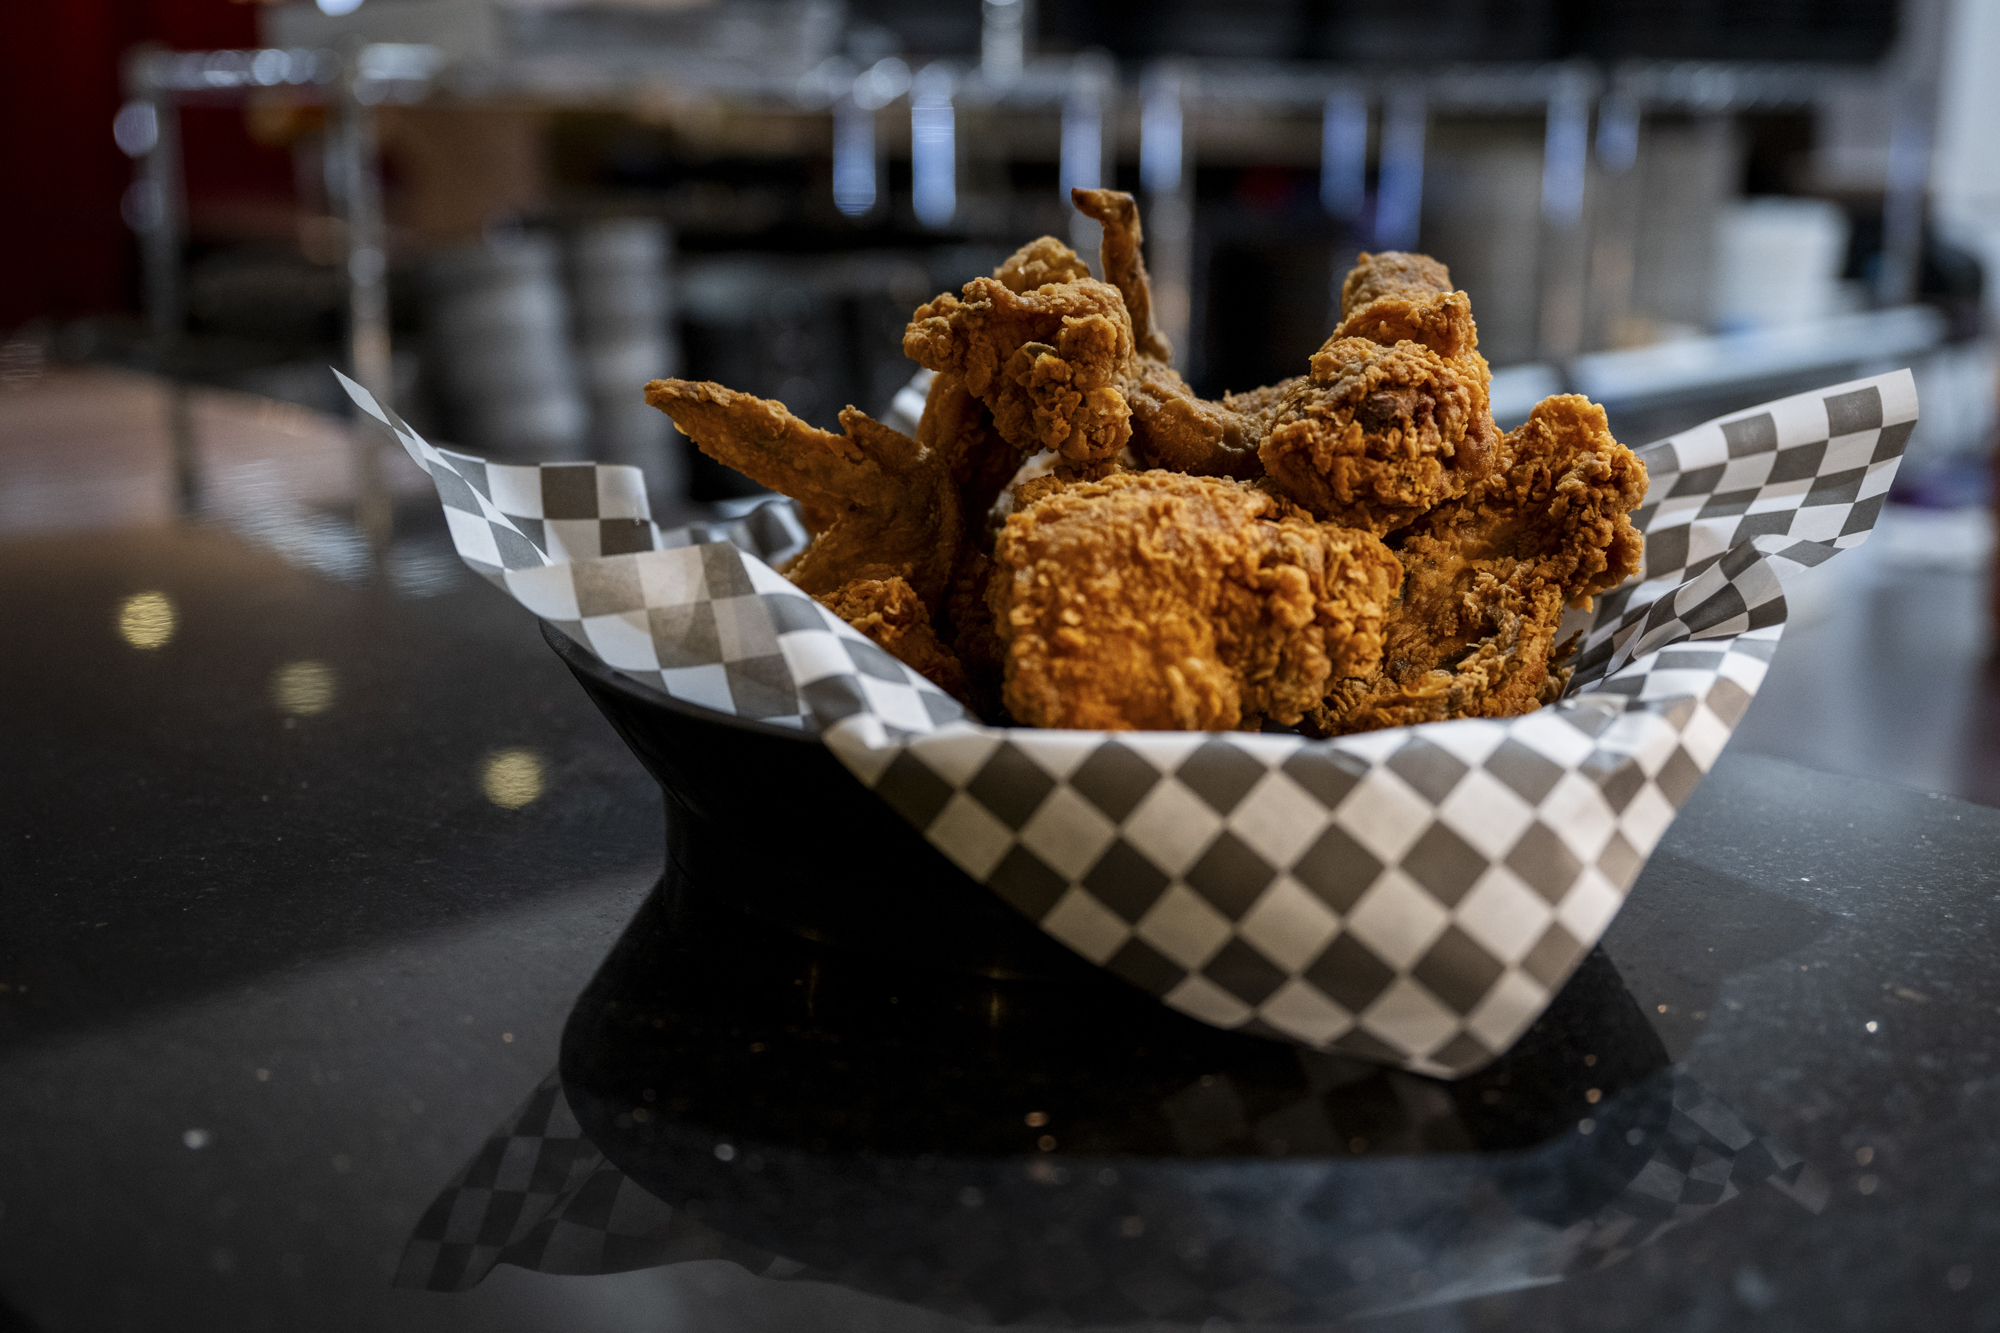 A paper-lined basket of fried chicken on a countertop.